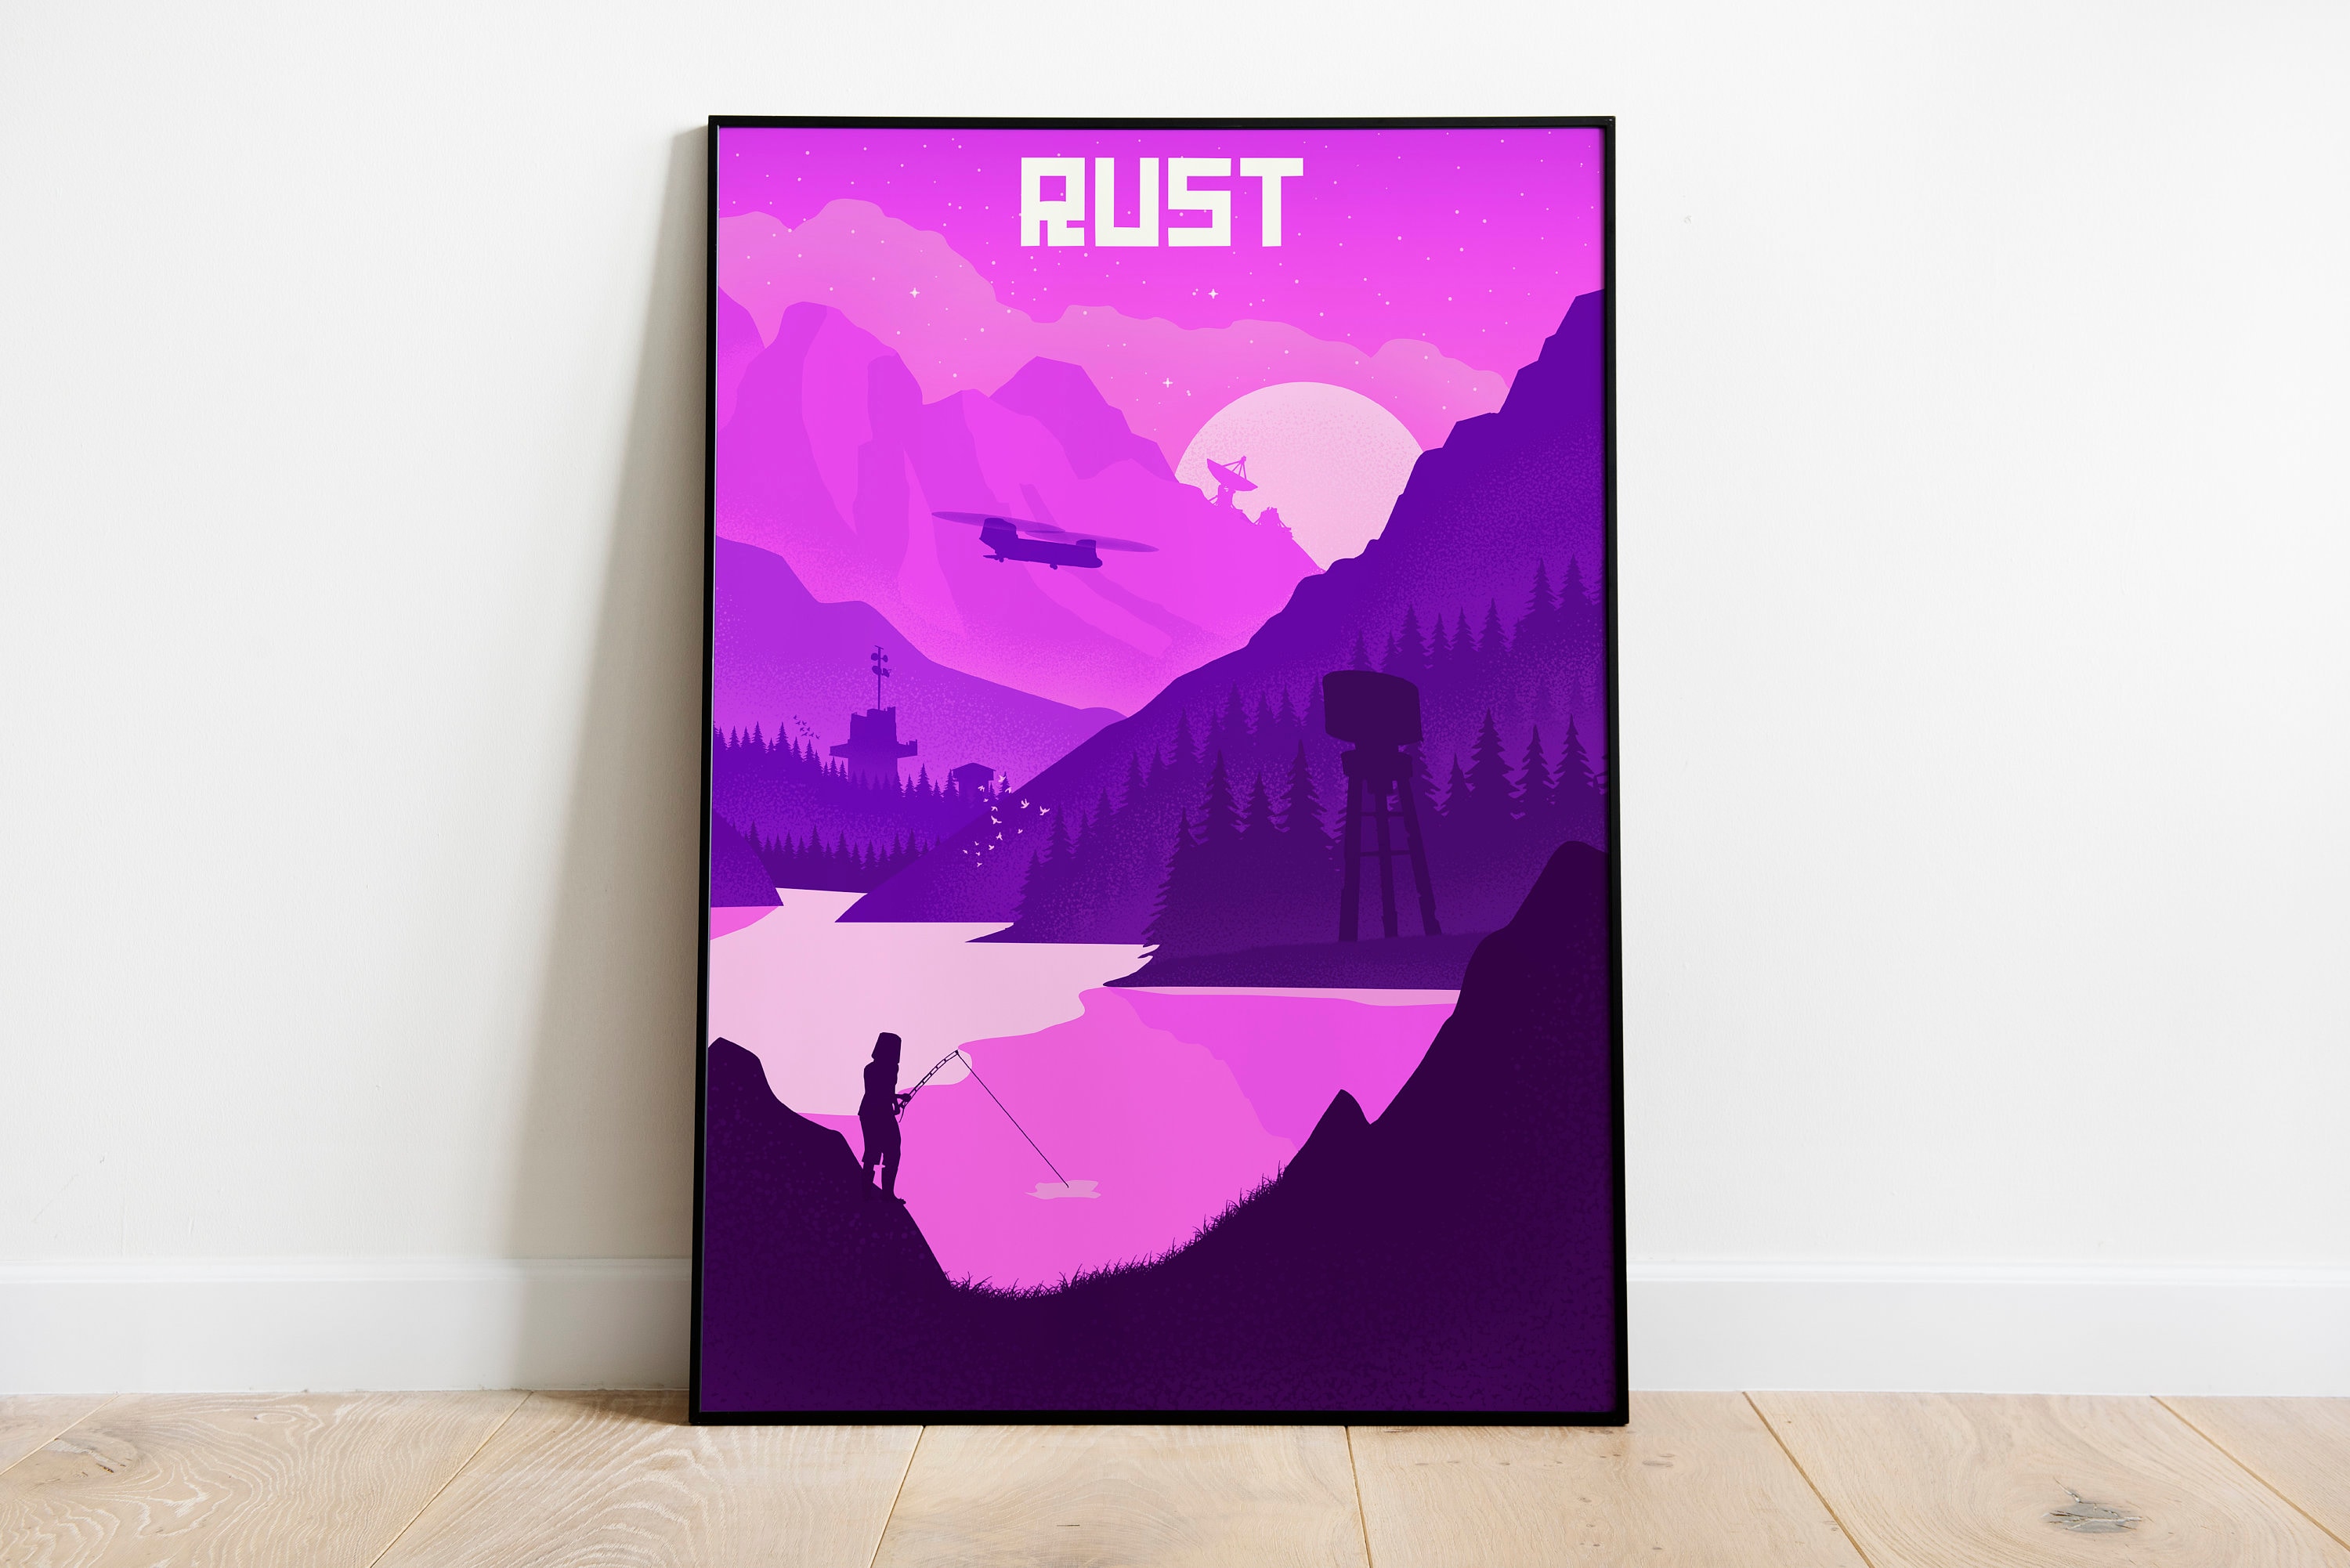 Sunset Overdrive Poster for Sale by sanusiiis